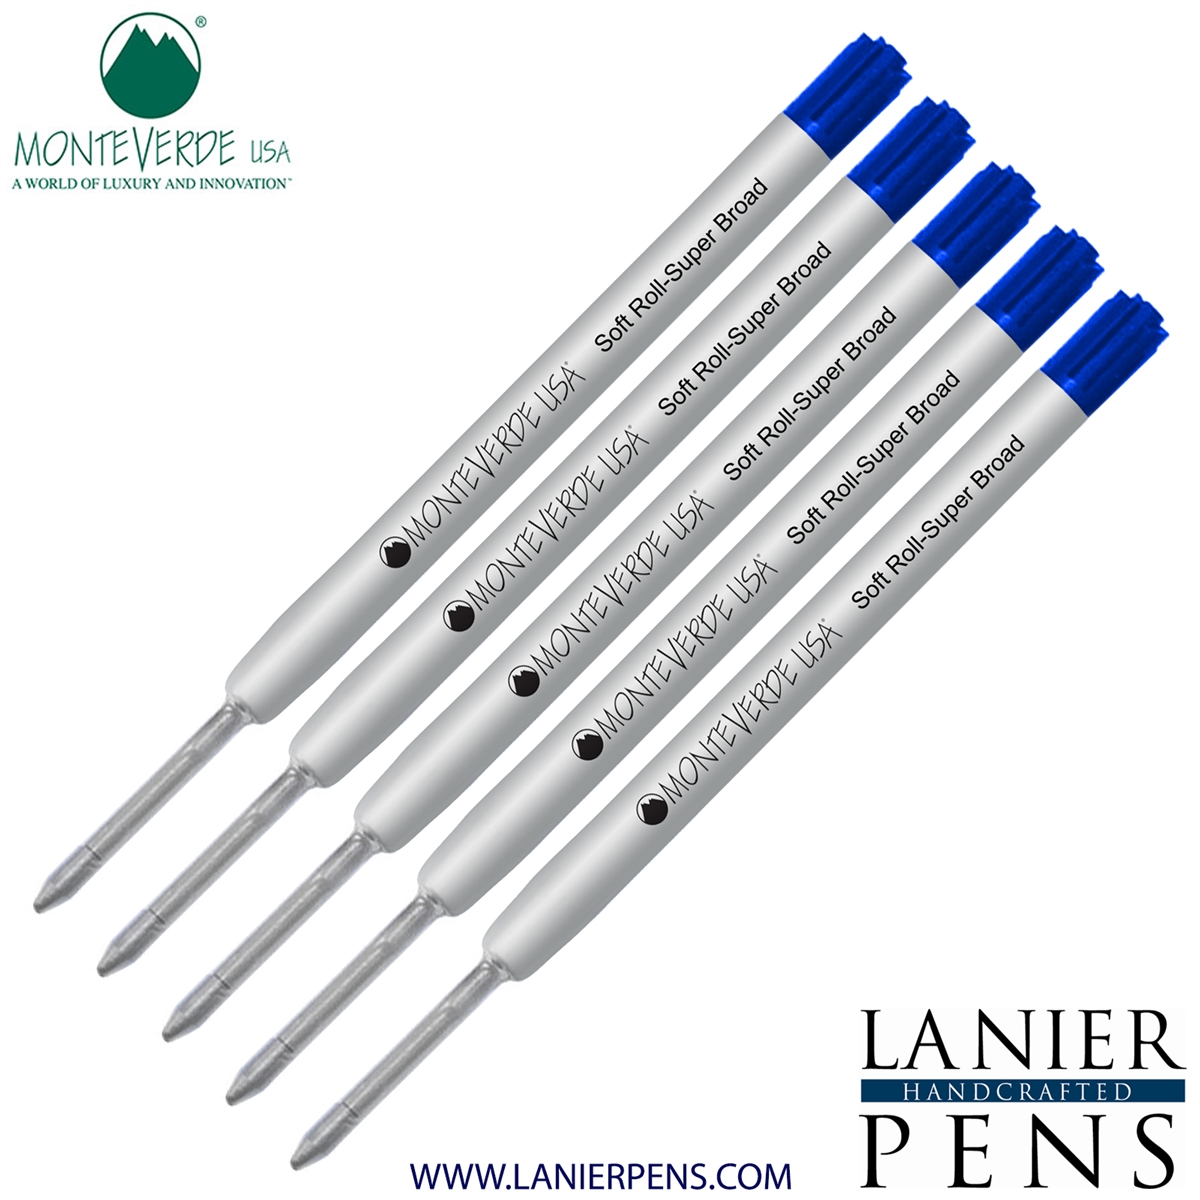 5 Pack - Monteverde Soft Roll Super Broad Ballpoint P15 Paste Ink Refill Compatible with most Parker Style Ballpoint Pens - Blue (Super Broad Tip 1.4mm) - Lanier Pens